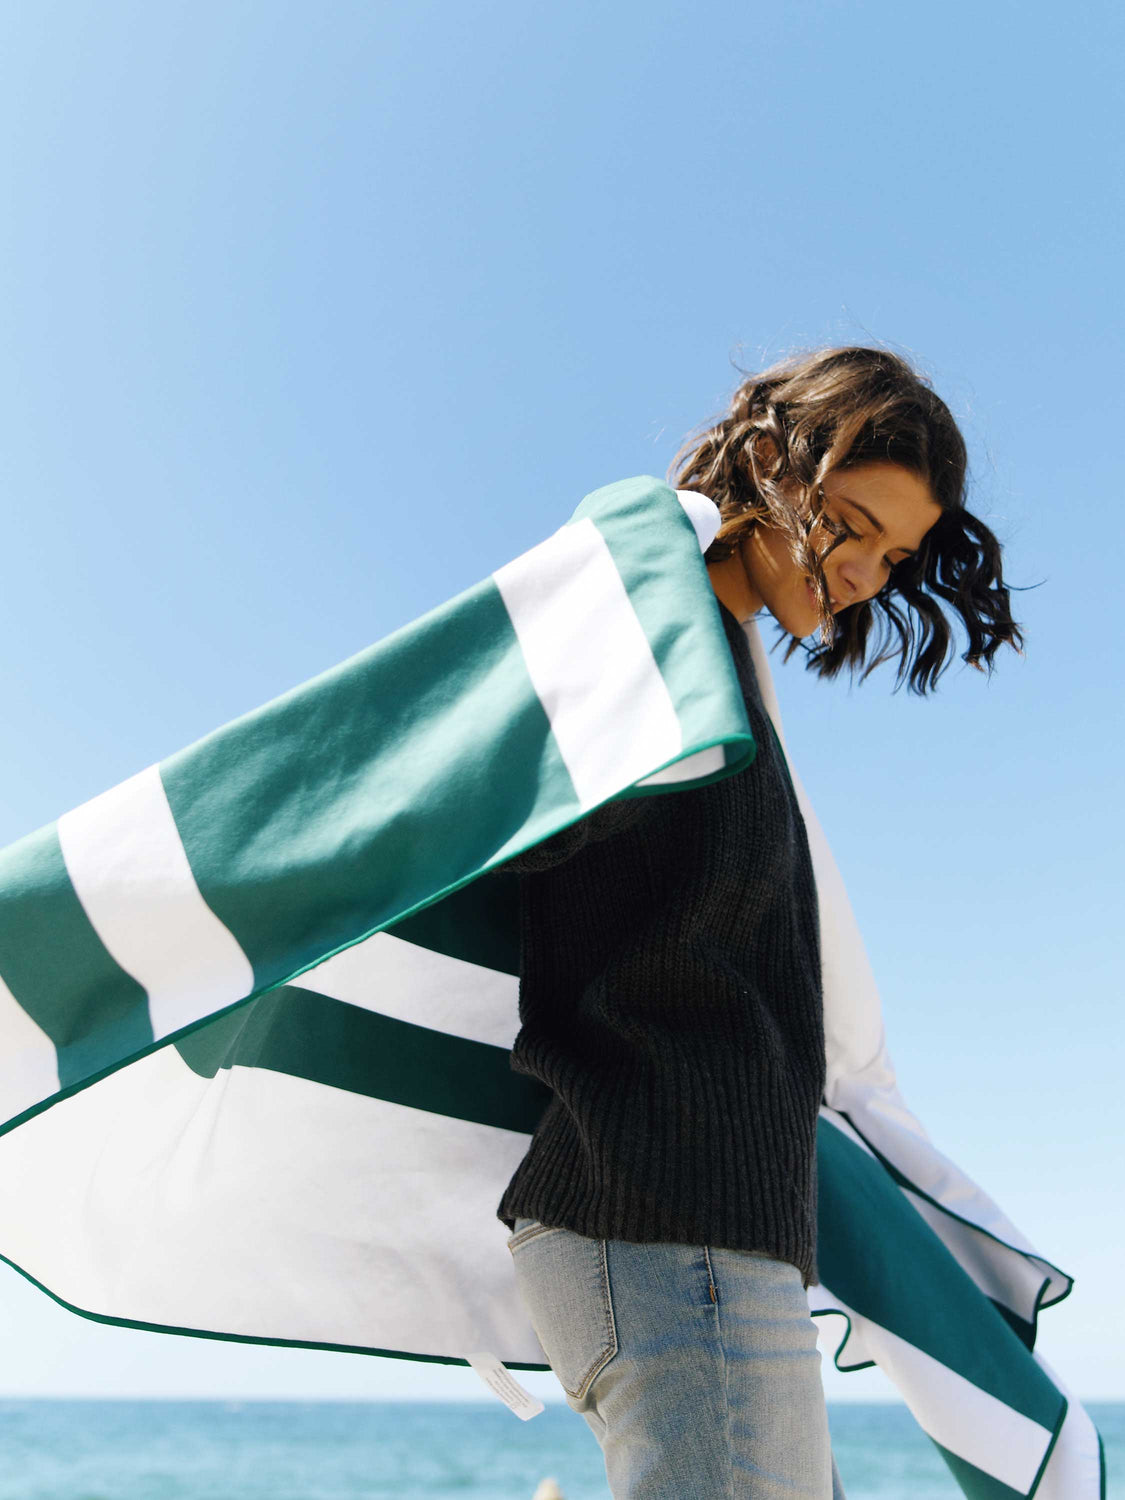 A woman wrapped in an oversized green and white striped microfiber beach towel blowing in the ocean breeze.